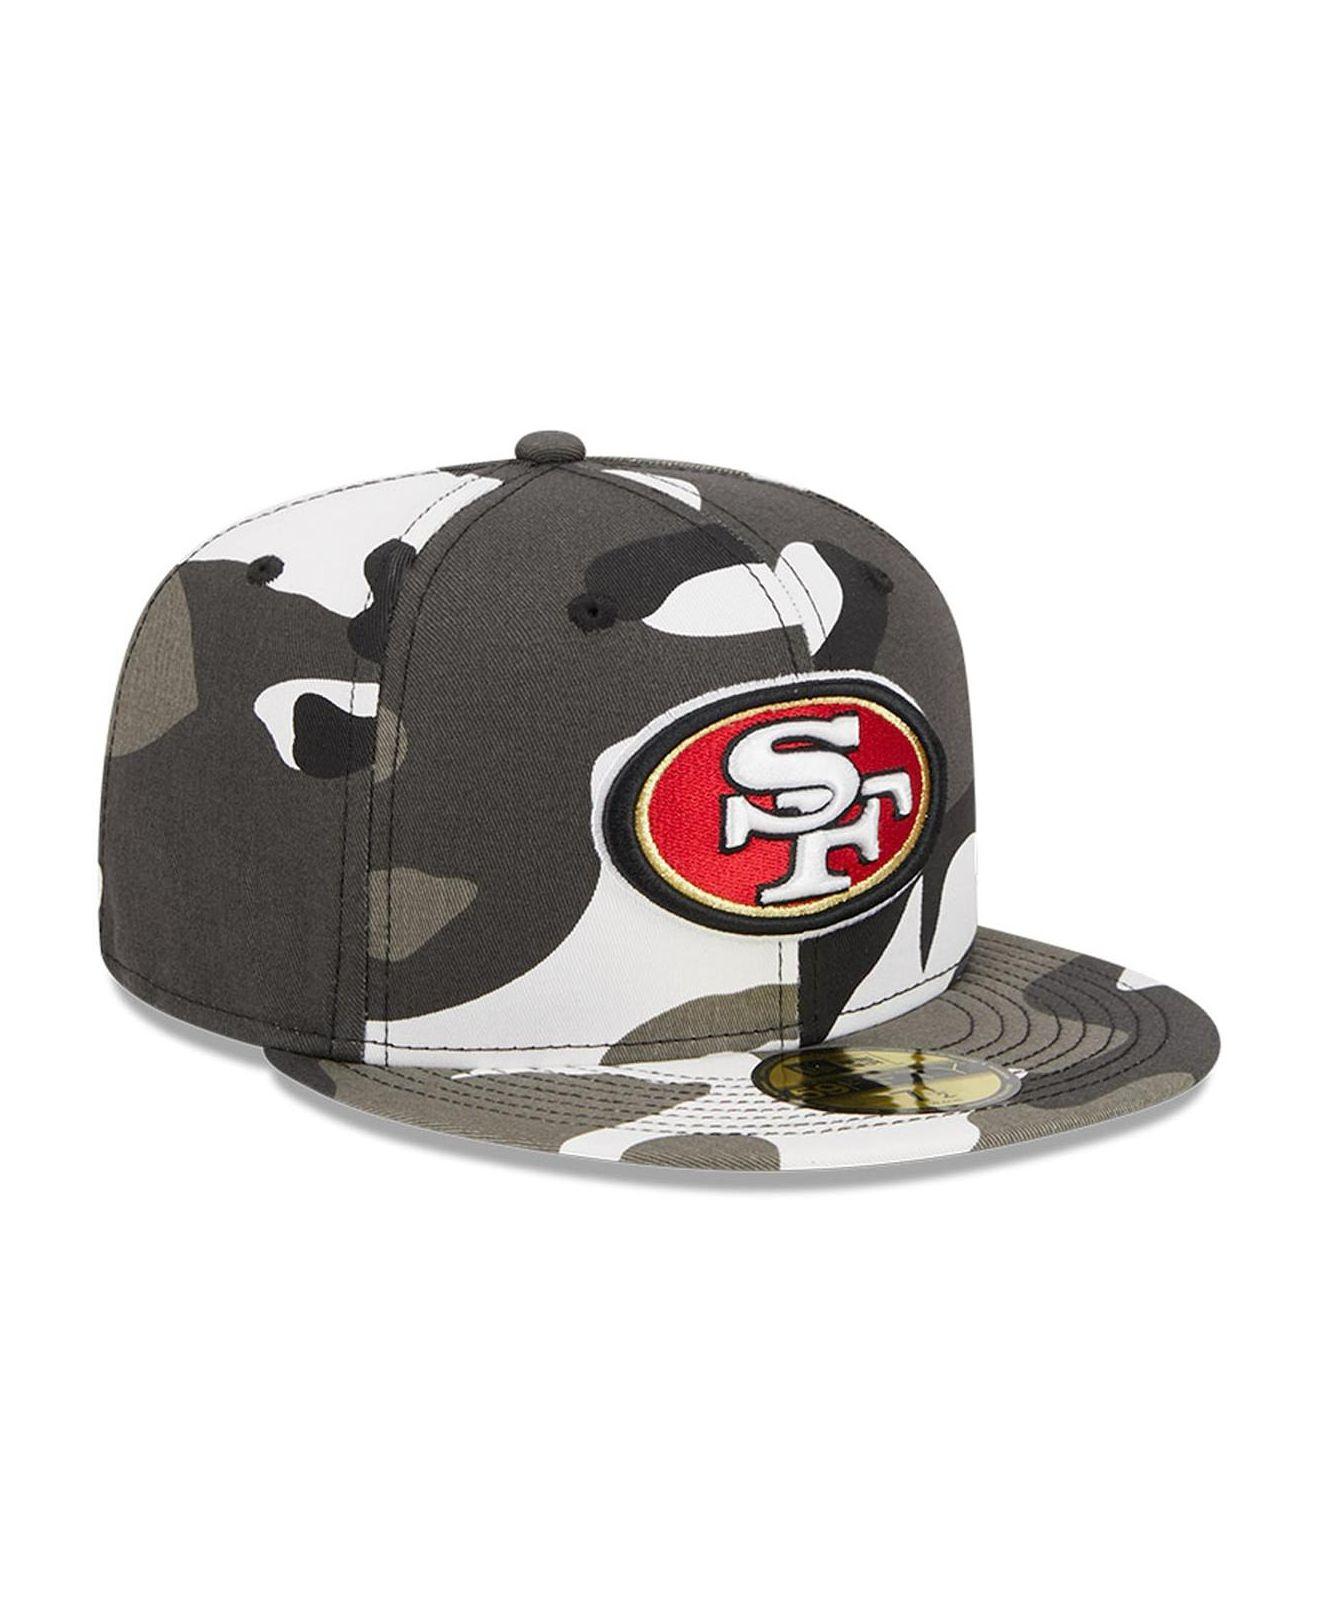 KTZ San Francisco 49ers Urban Camo 59fifty Fitted Hat for Men